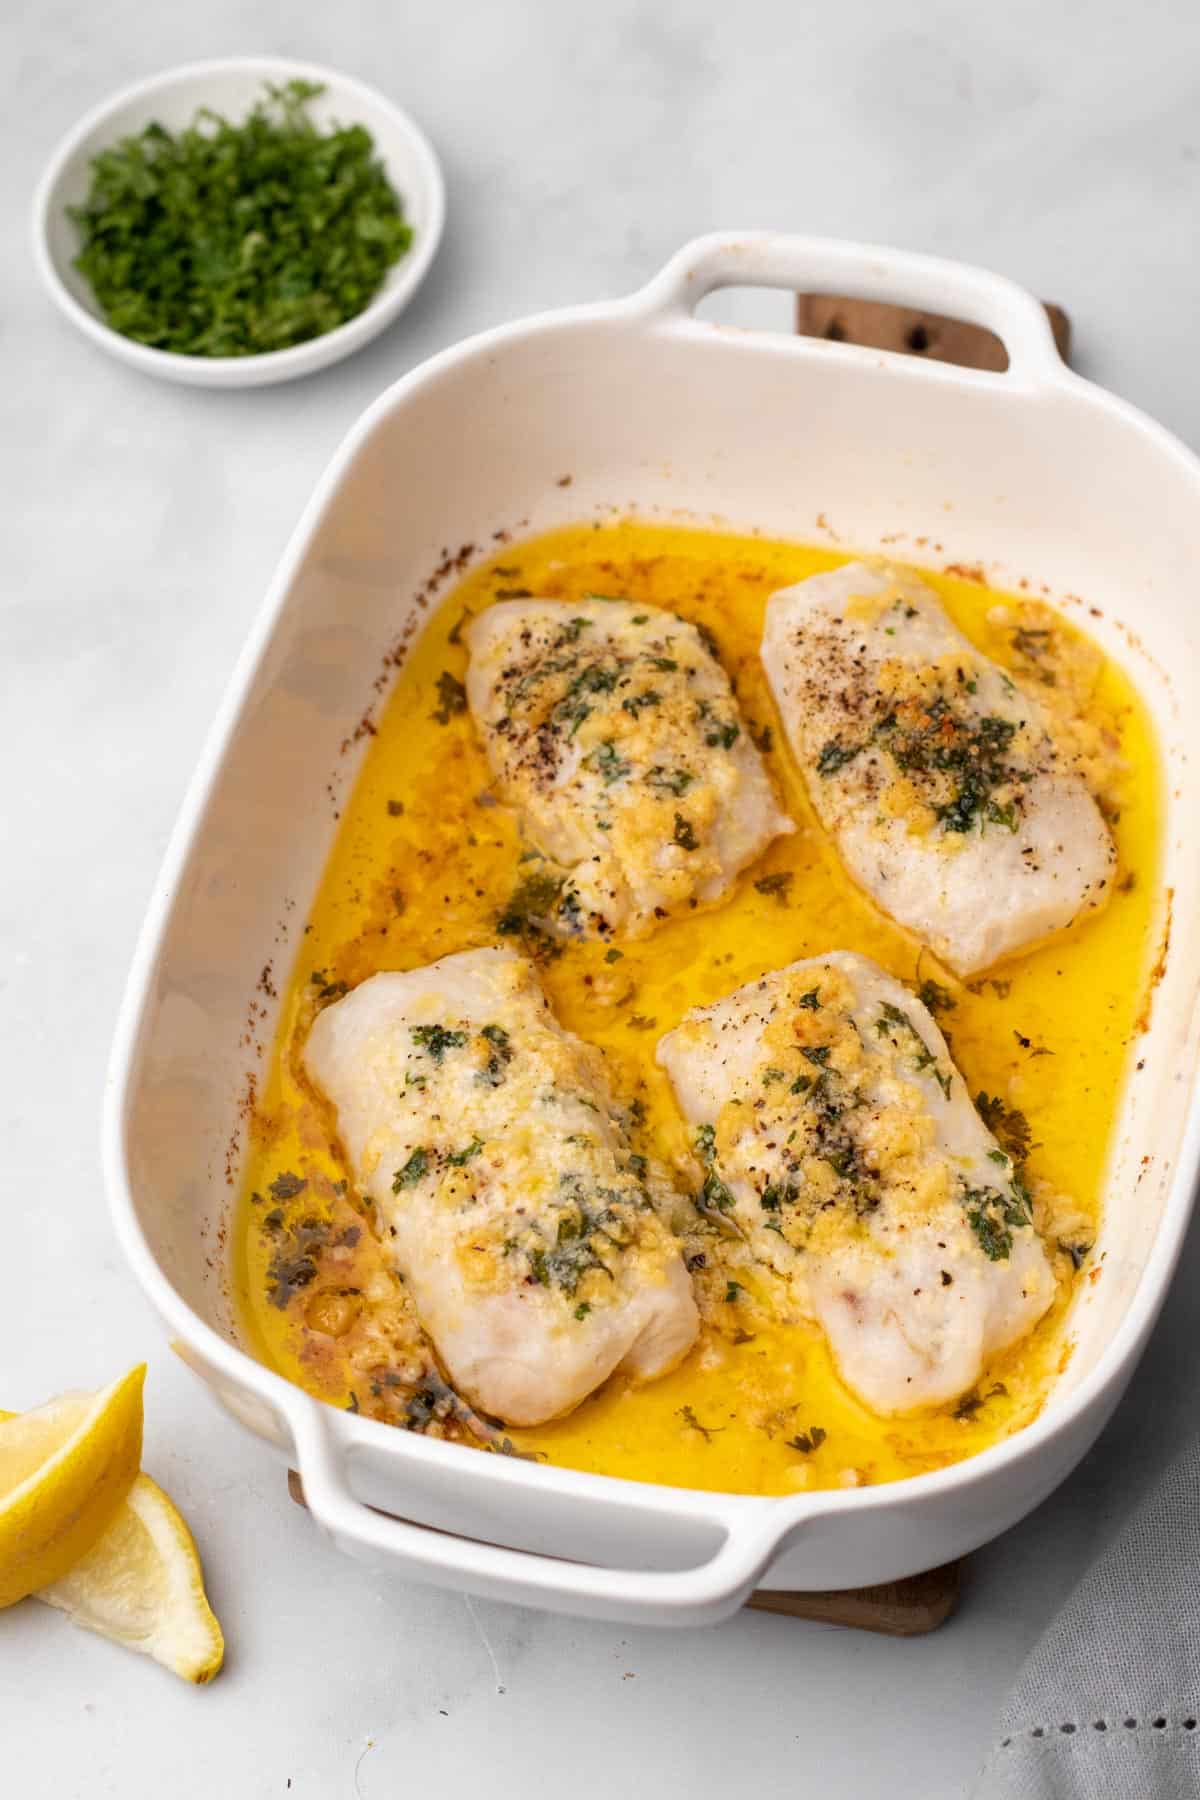 Baked cod with parmesan and garlic butter in a baking dish next to a ramekin of parsley and lemon wedges